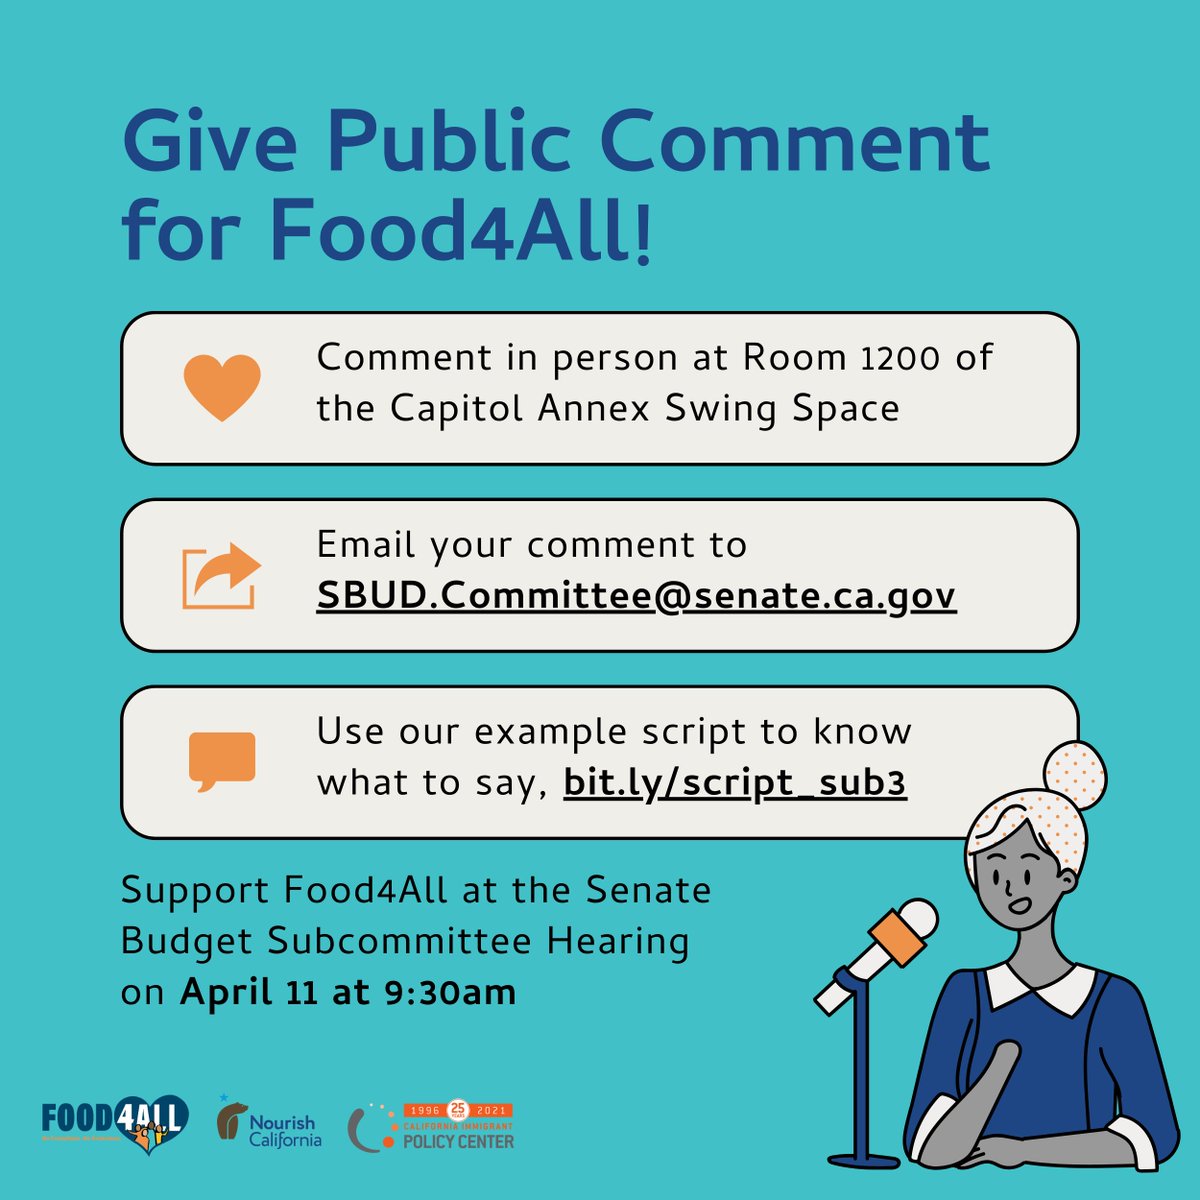 Catch the #Food4All Coalition at the Senate Budget Sub 3 hearing on 4/11 at 9:30am! We’ll be giving public comment to push CA to become the 1st state to expand access to CalFresh, regardless of age/immigration status #NoExceptionsNoExclusions #NoDelays